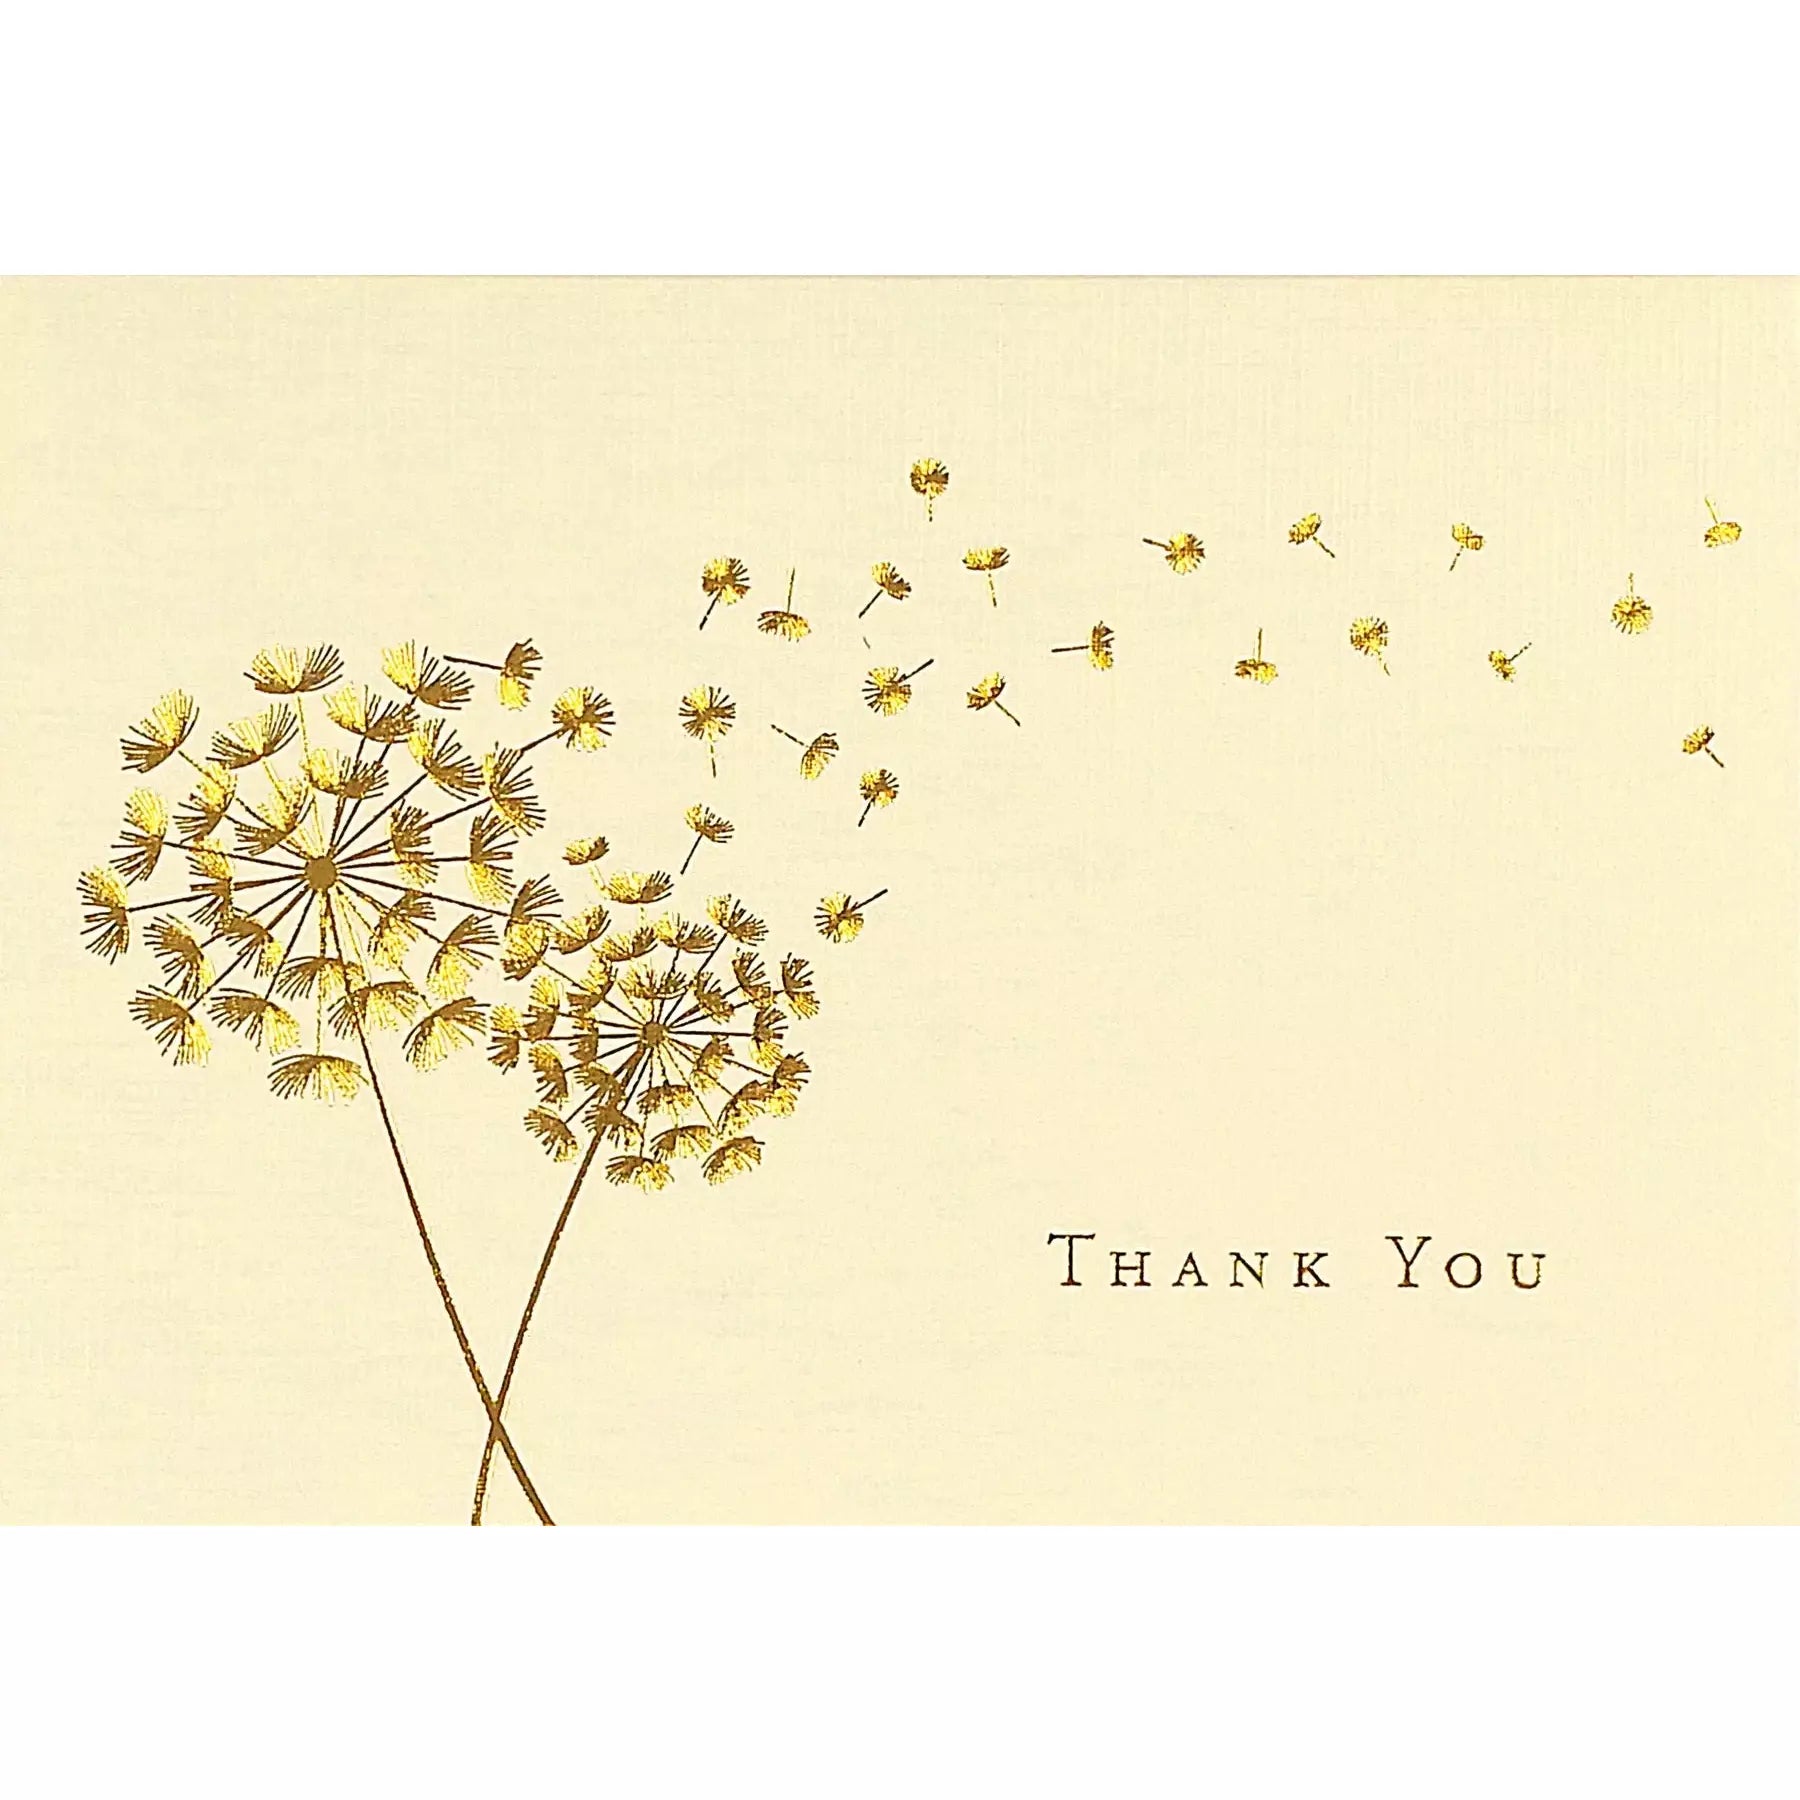 200+ Heartfelt Ways To Say Thank You For Birthday Wishes